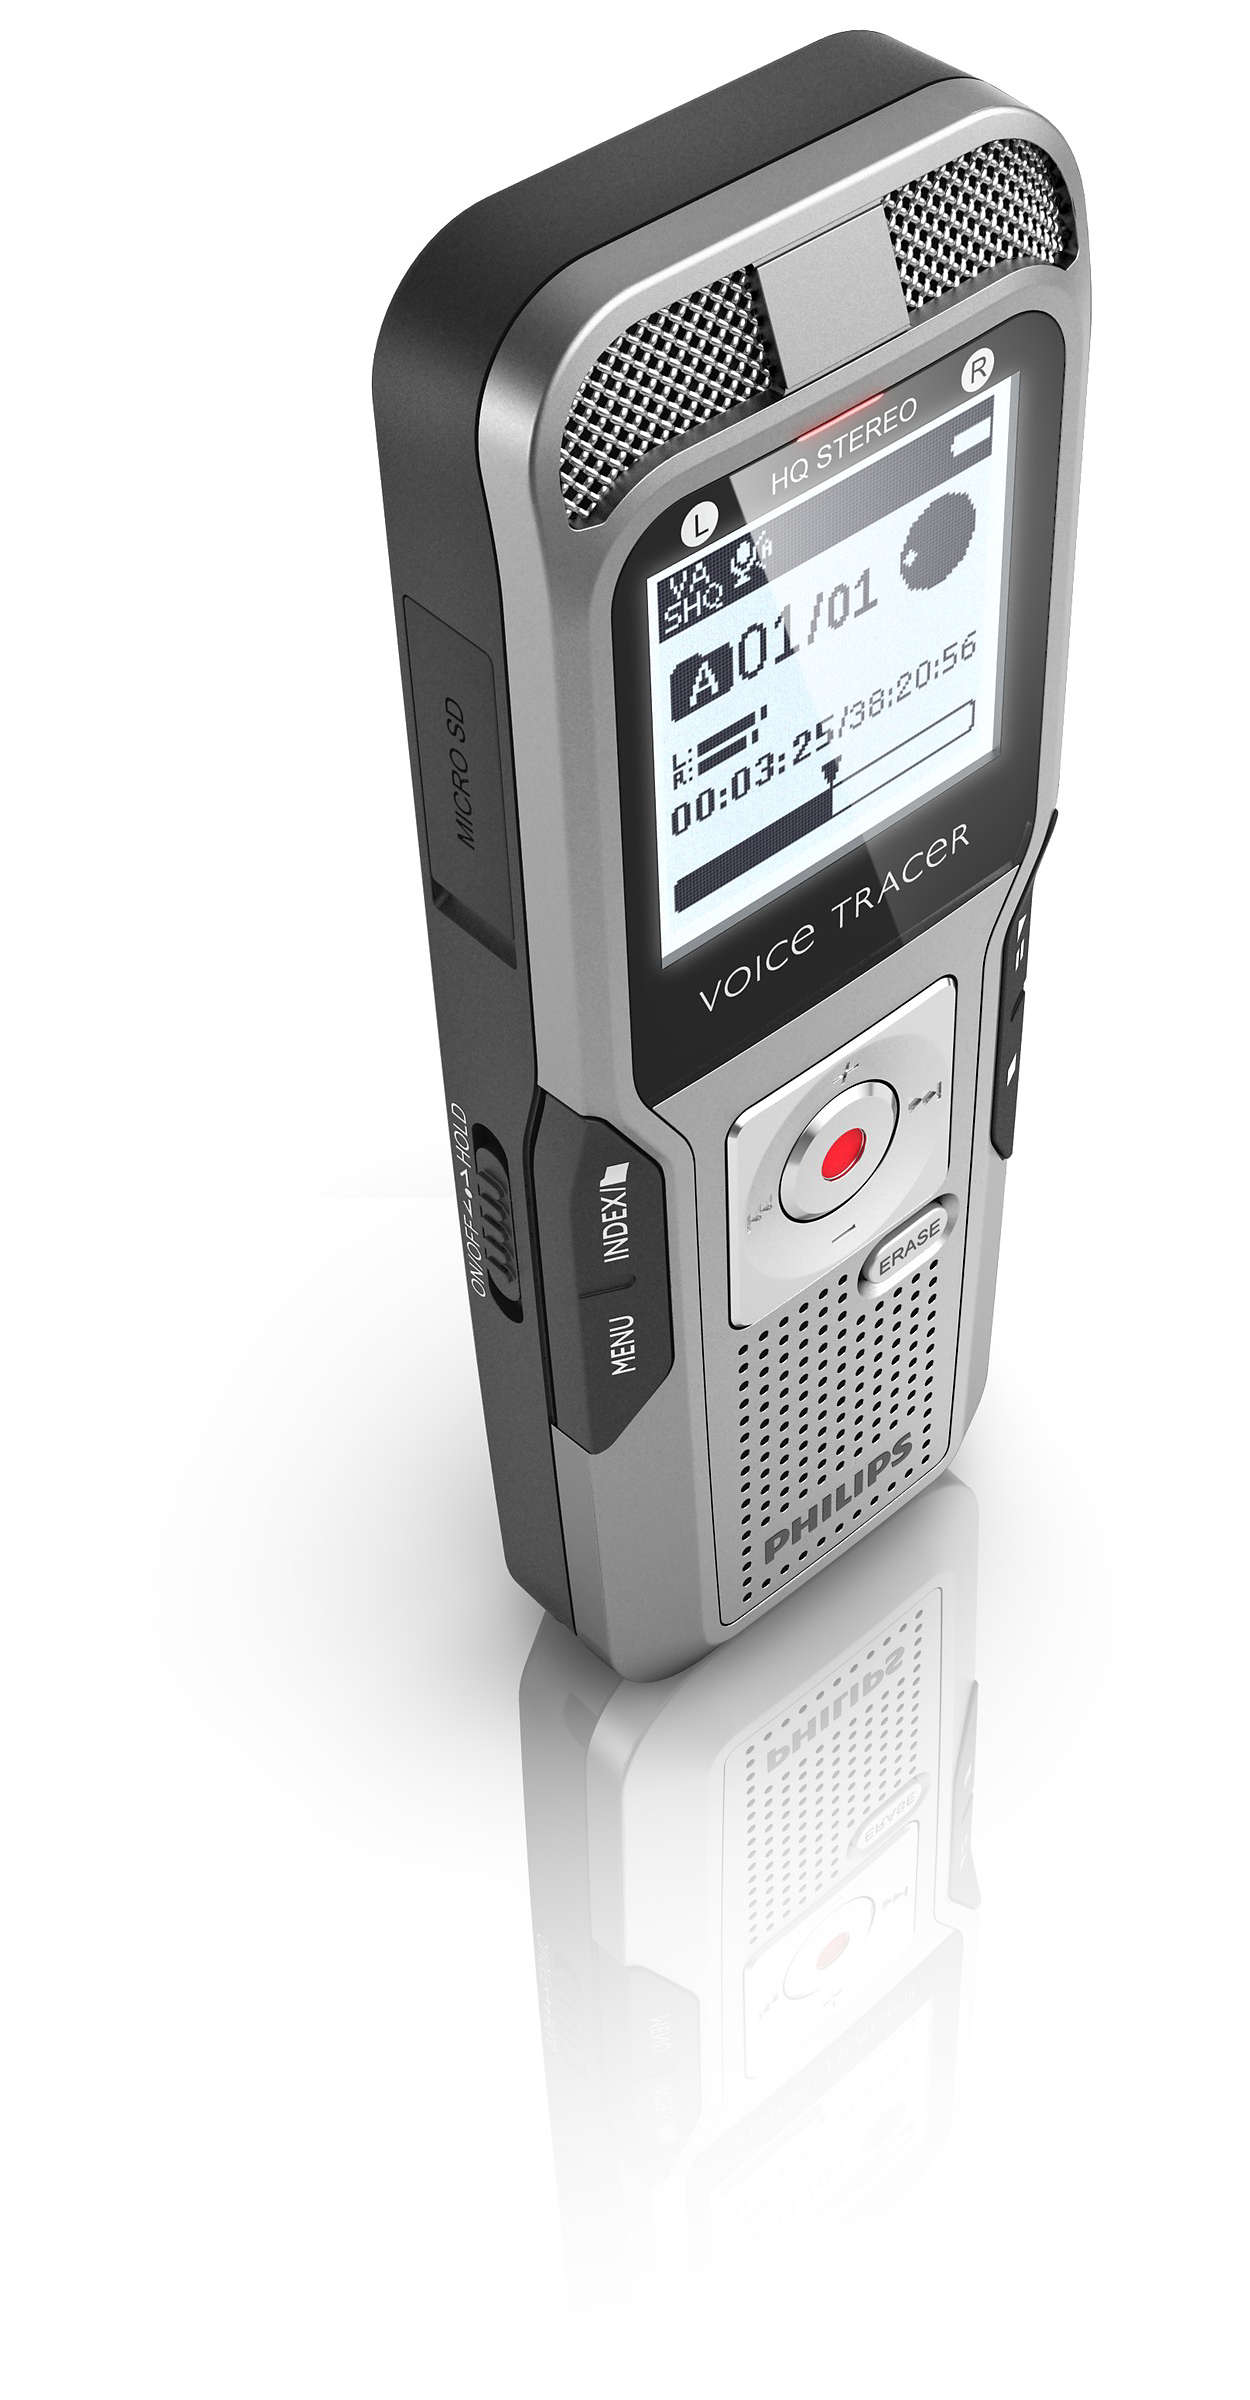 product title philips dvt3100 digital voice tracer and recorder